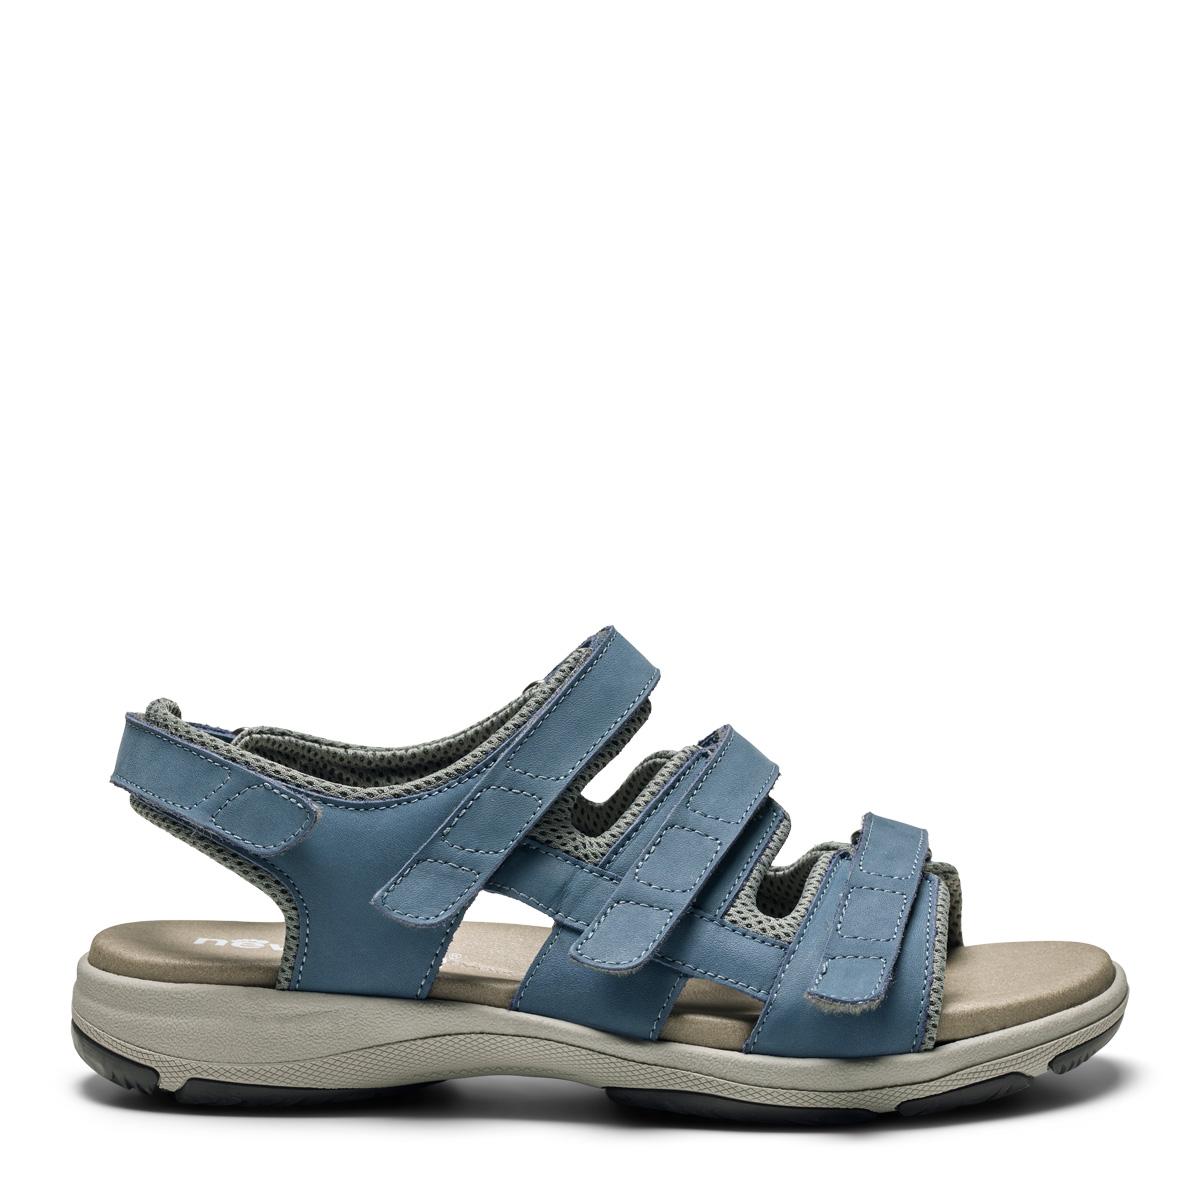 Sporty women´s sandal with adjustable heel strap and velcro straps for regulation